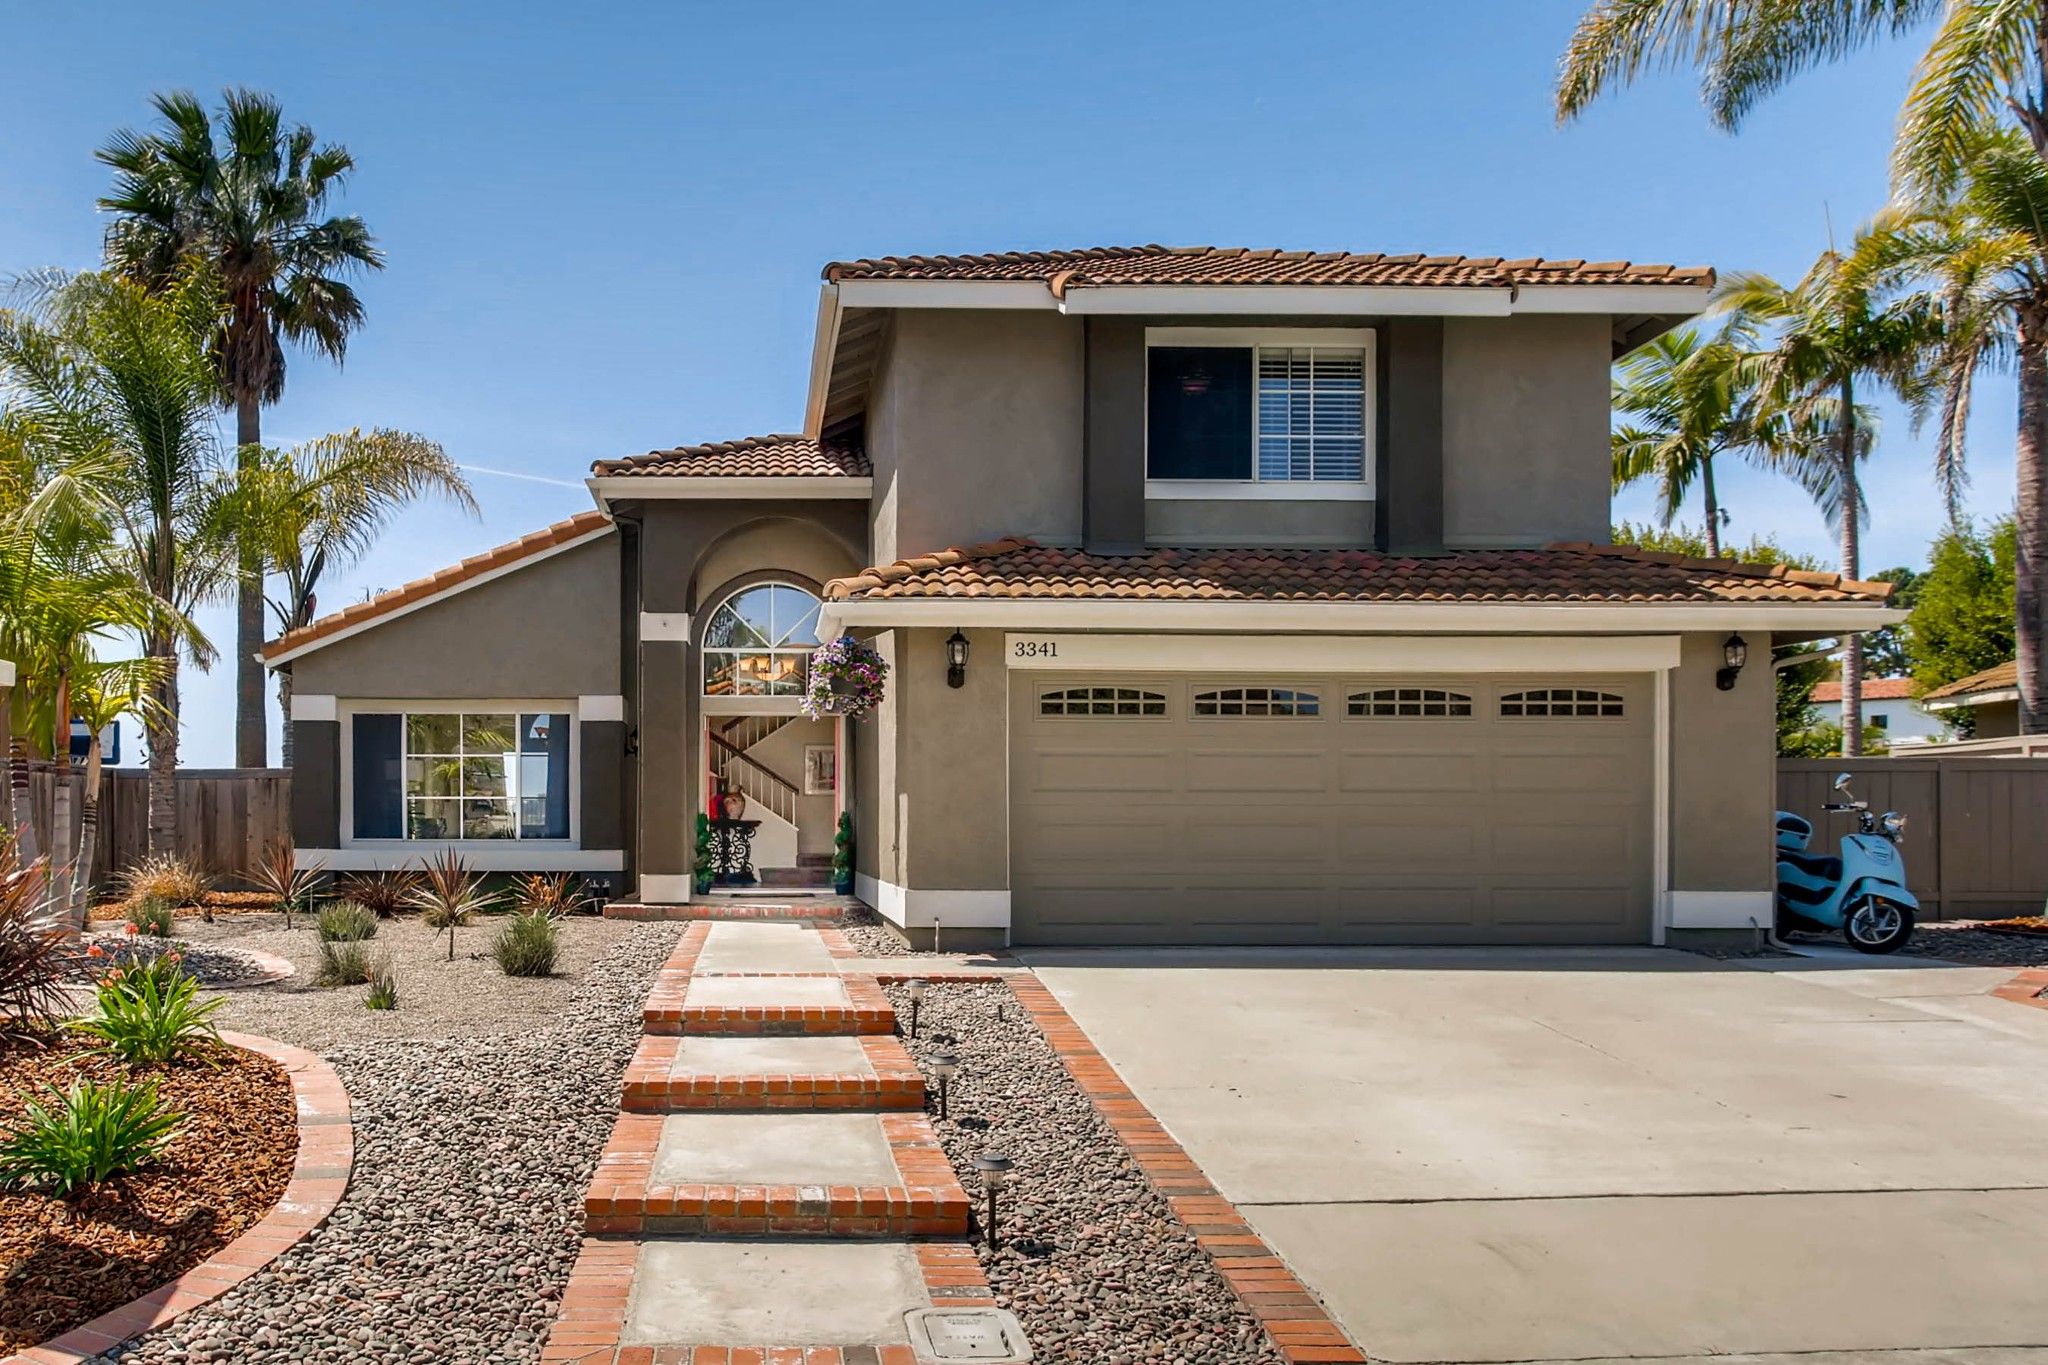 Recently sold a property at 3341 Golfers DR in Oceanside